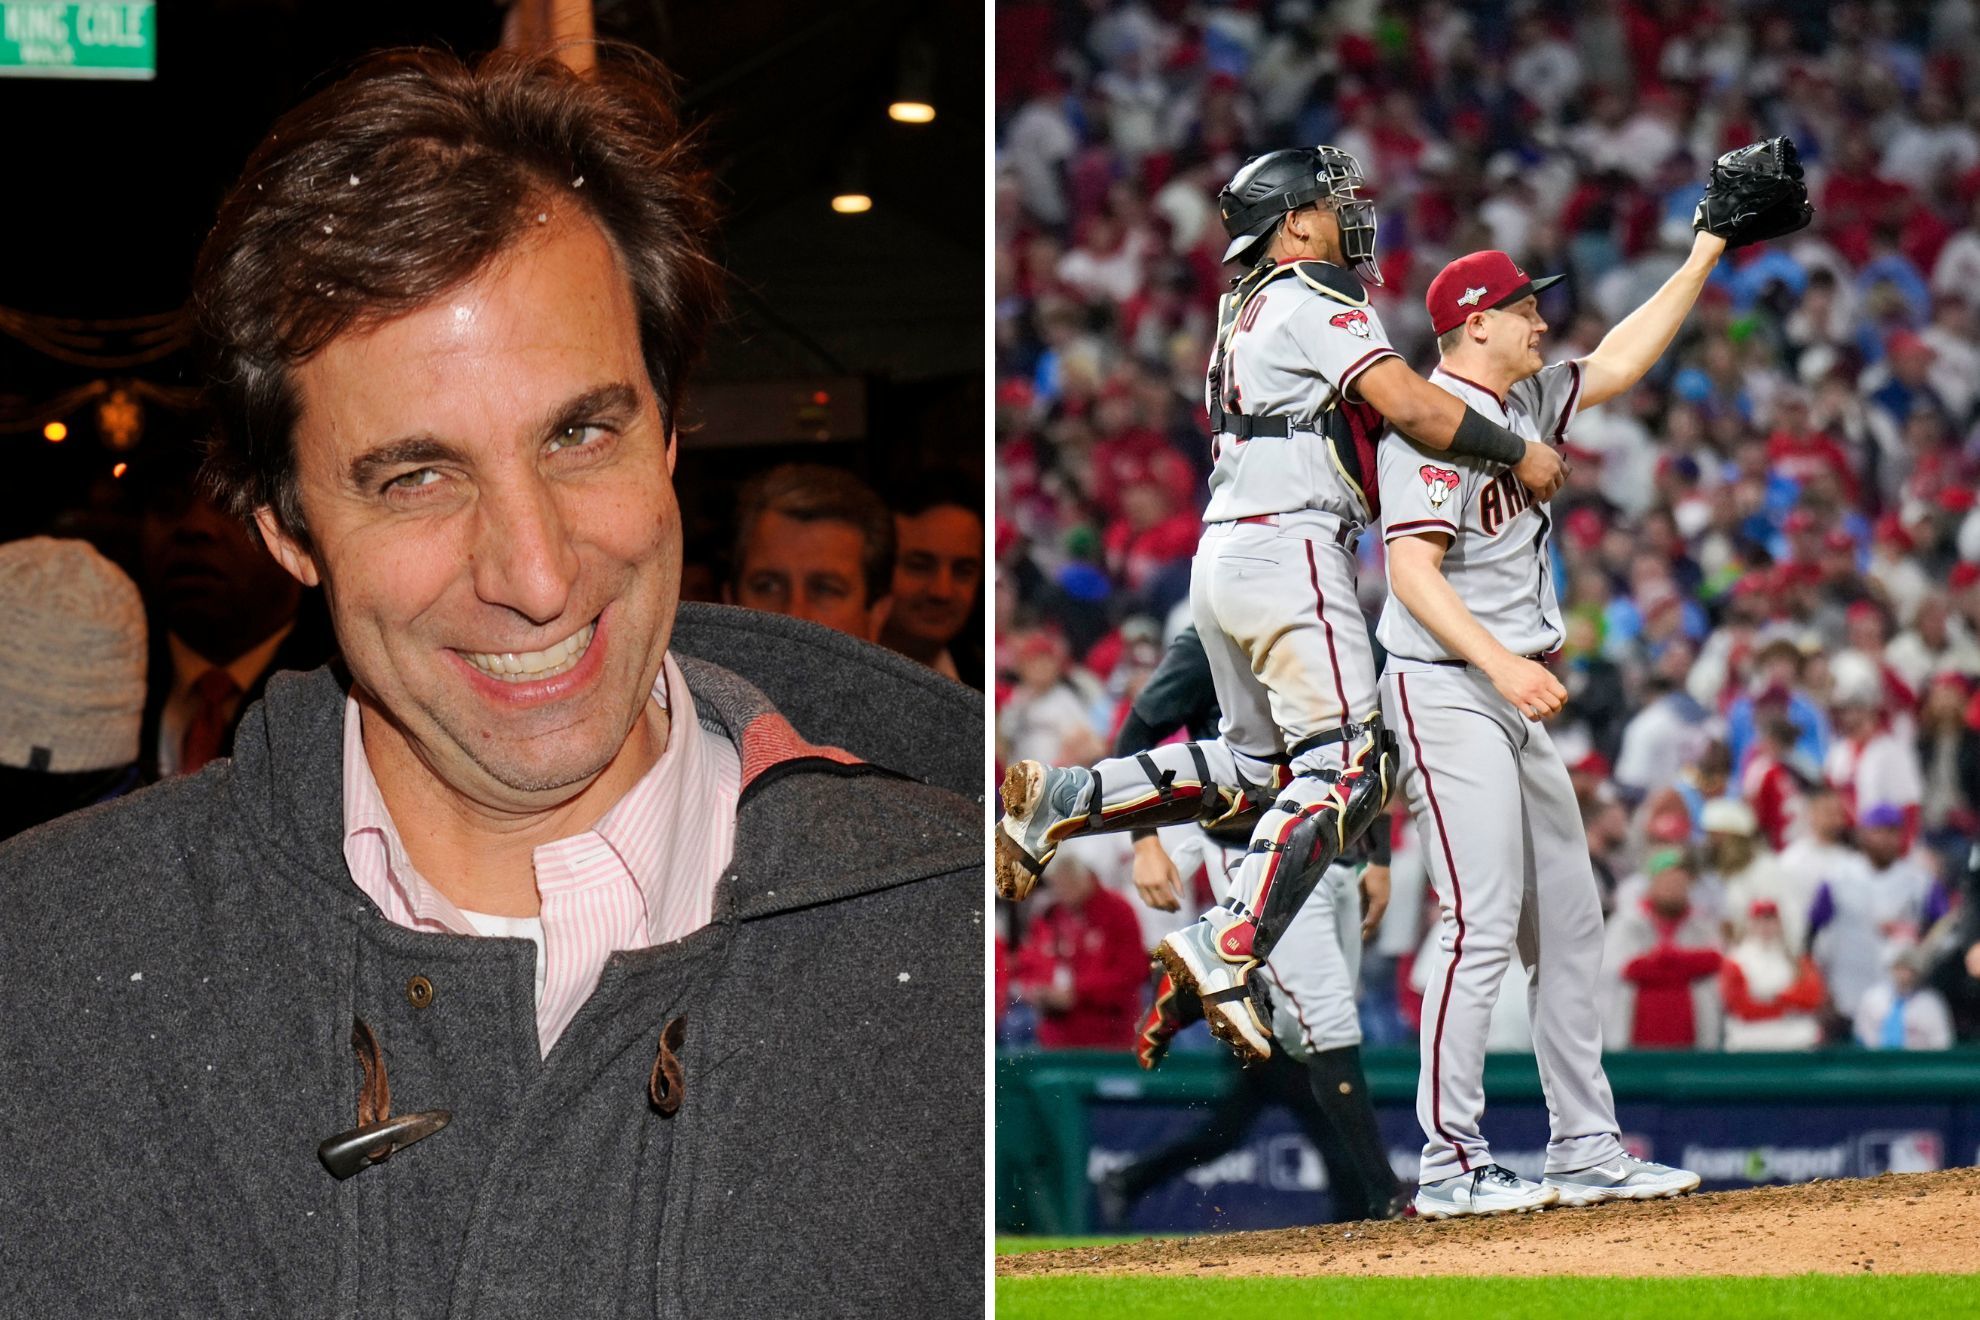 Chris Russo vowed to retire if the D-Backs advanced to the World Series.